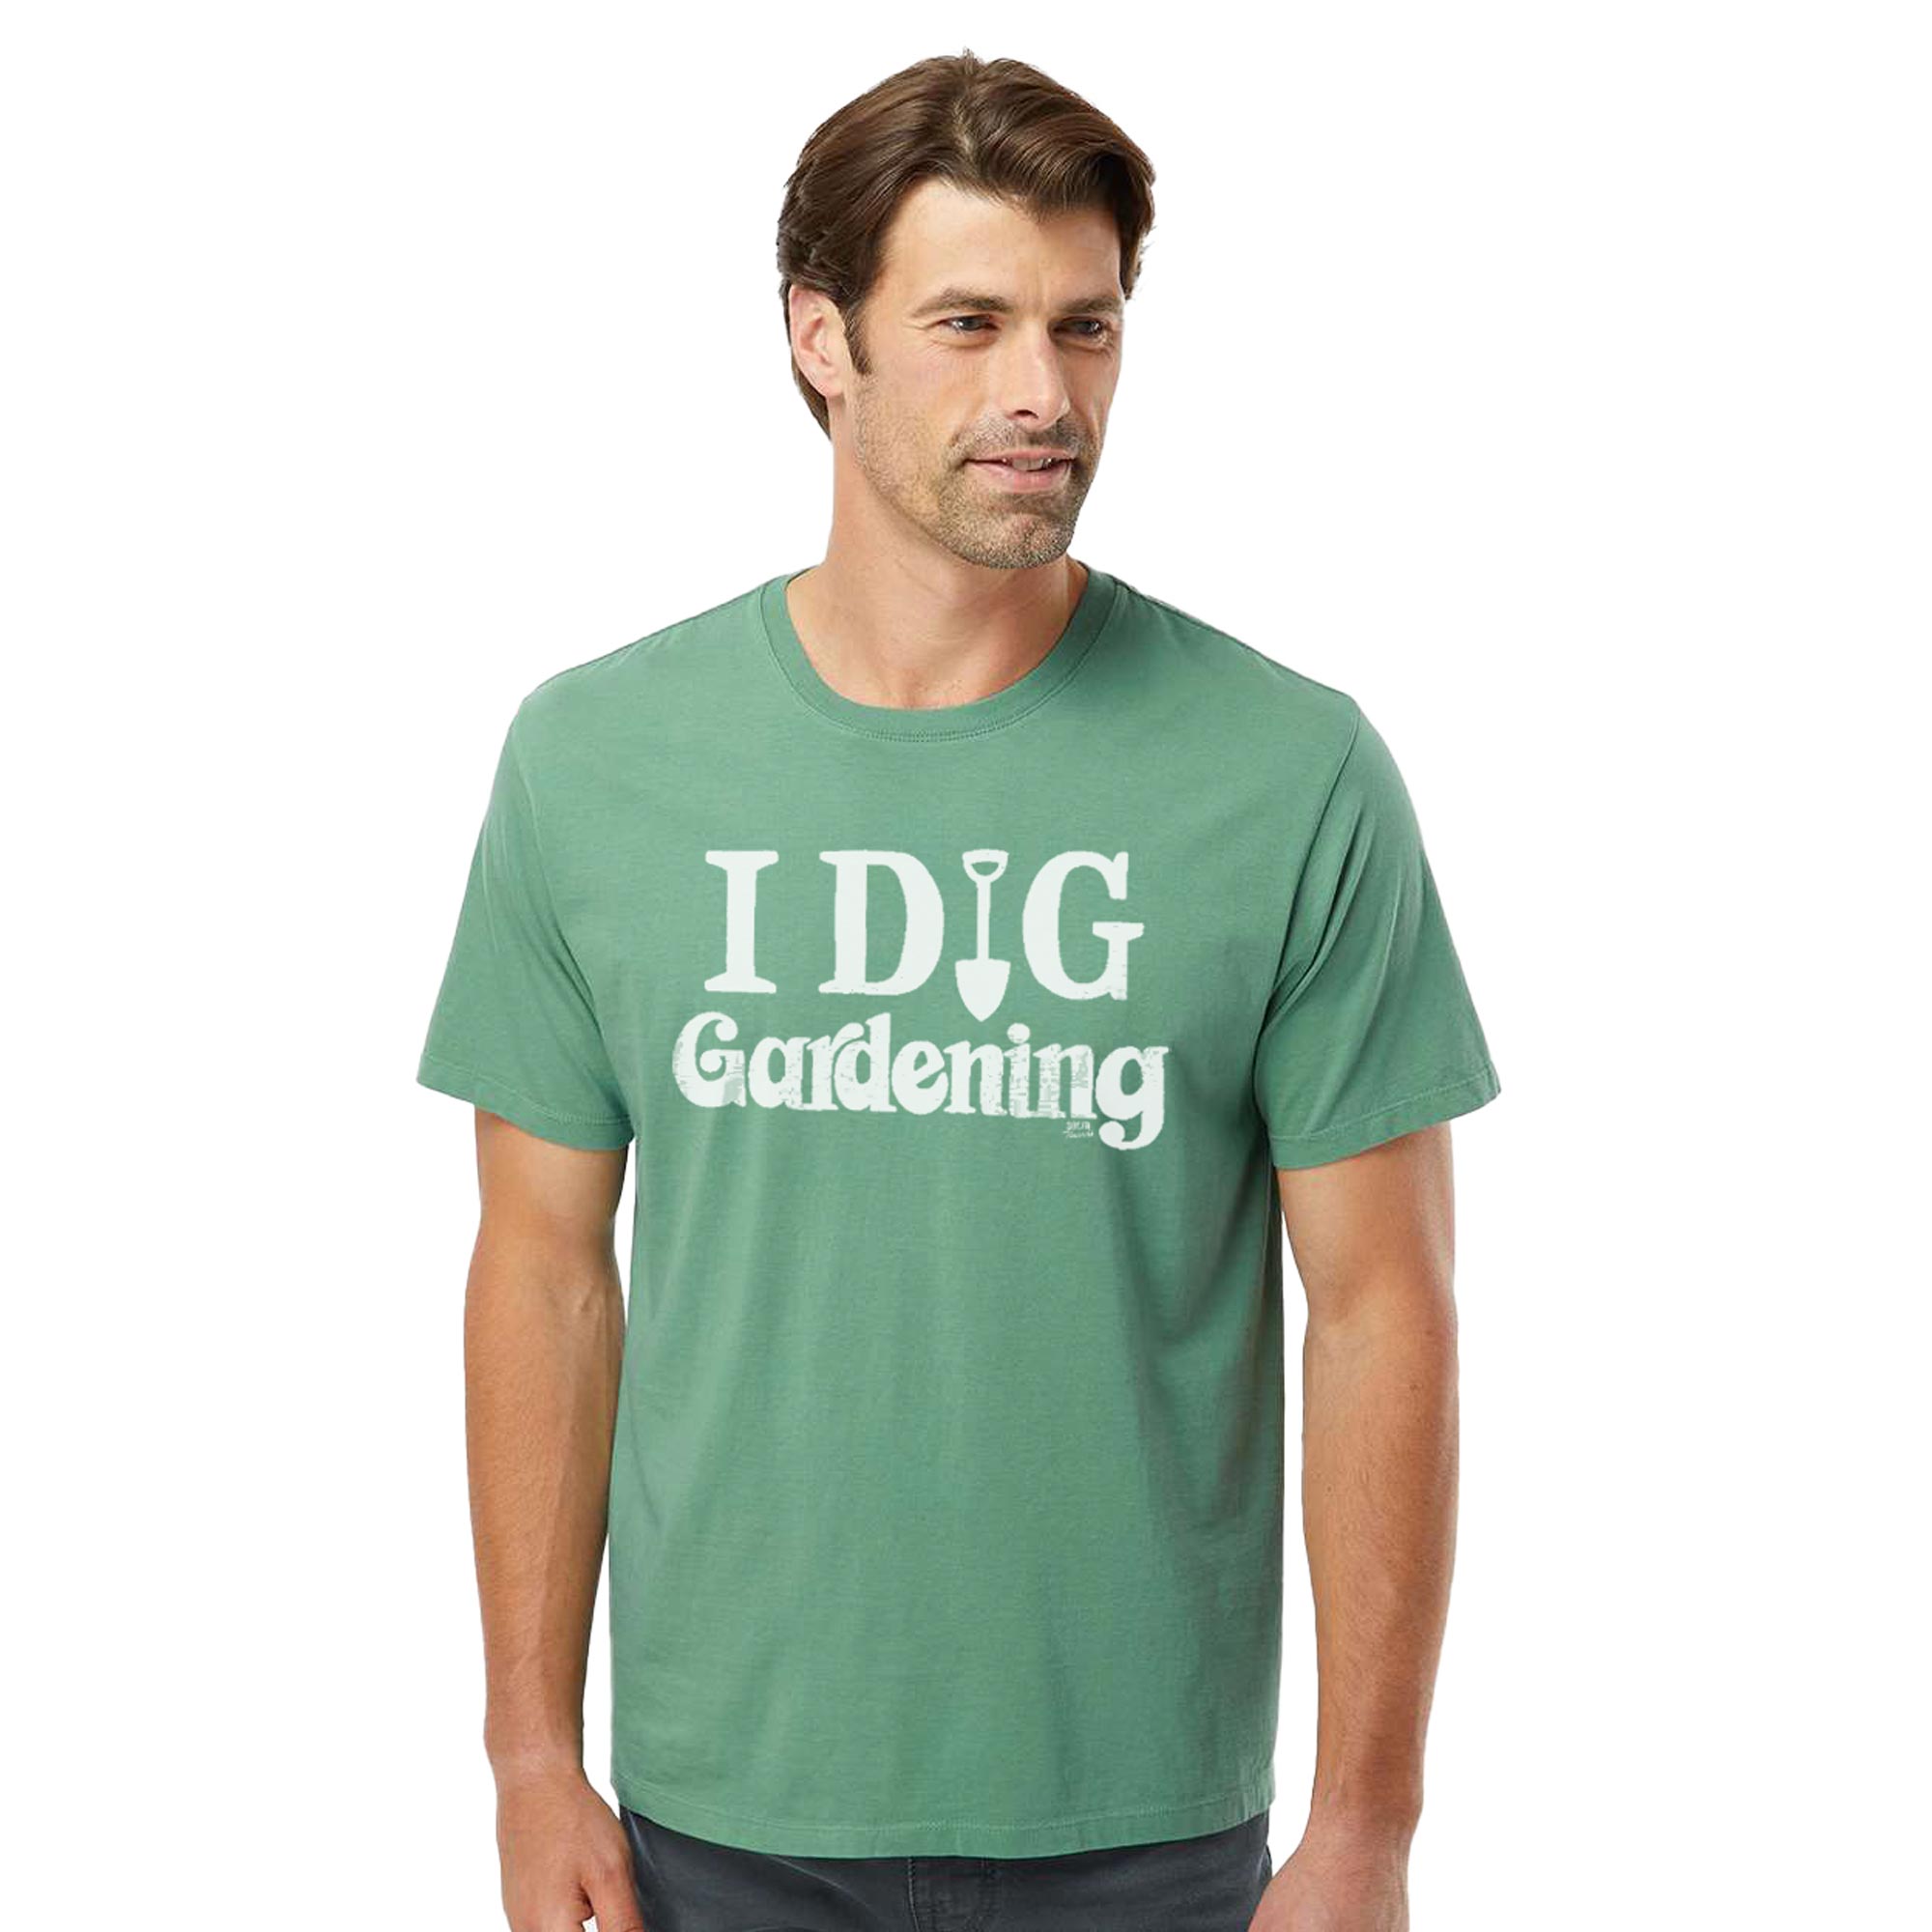 I Dig Gardening Vintage Organic Cotton T-shirt | Funny Nature   Tee On Model | Solid Threads